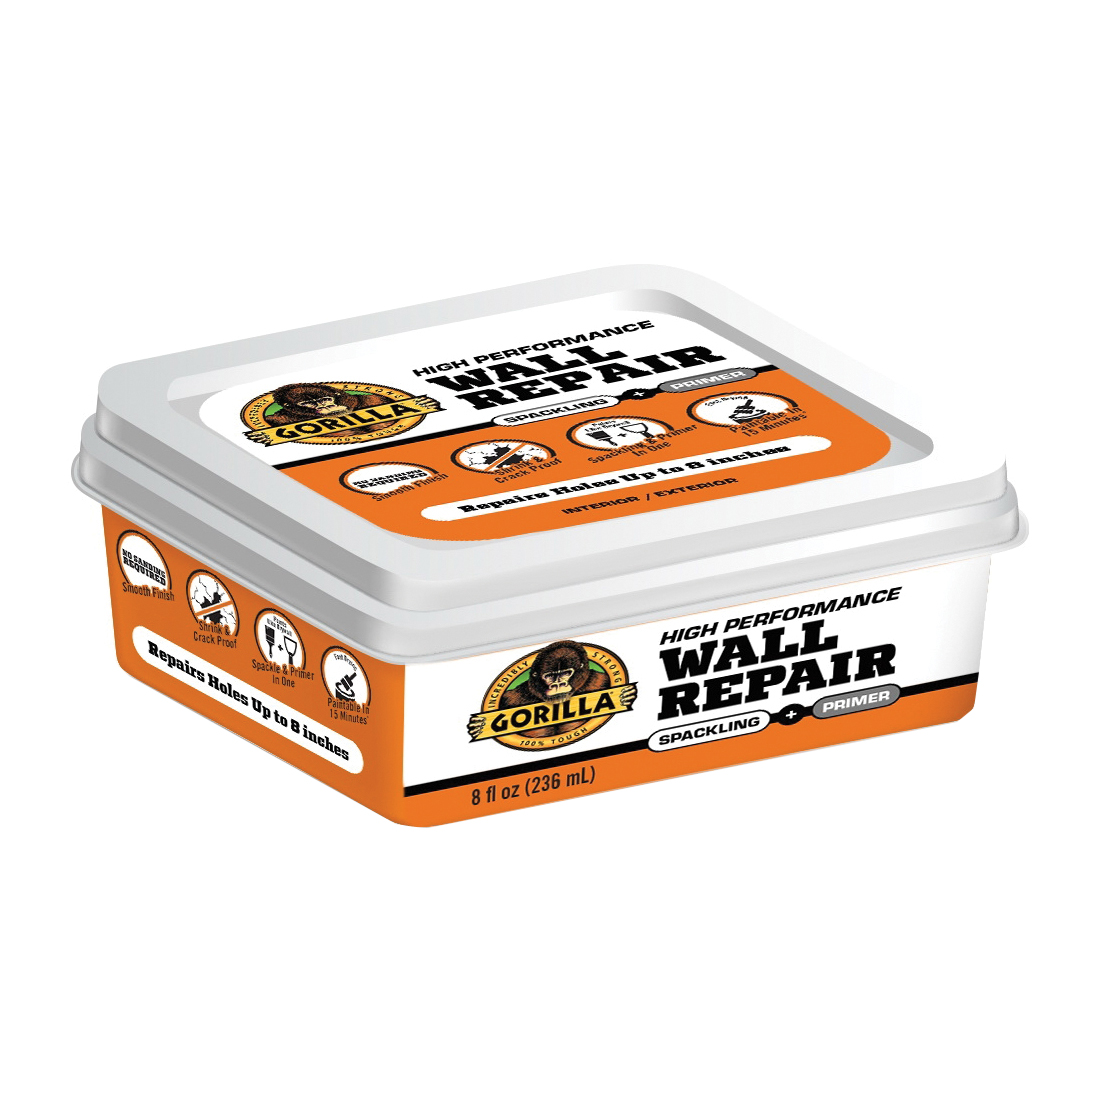 Gorilla Glue Jordan - Gorilla High Performance Wood Filler is the go-to  product for strong, durable repairs on cracks, gouges and holes. The unique  formula is easy to spread allowing for a